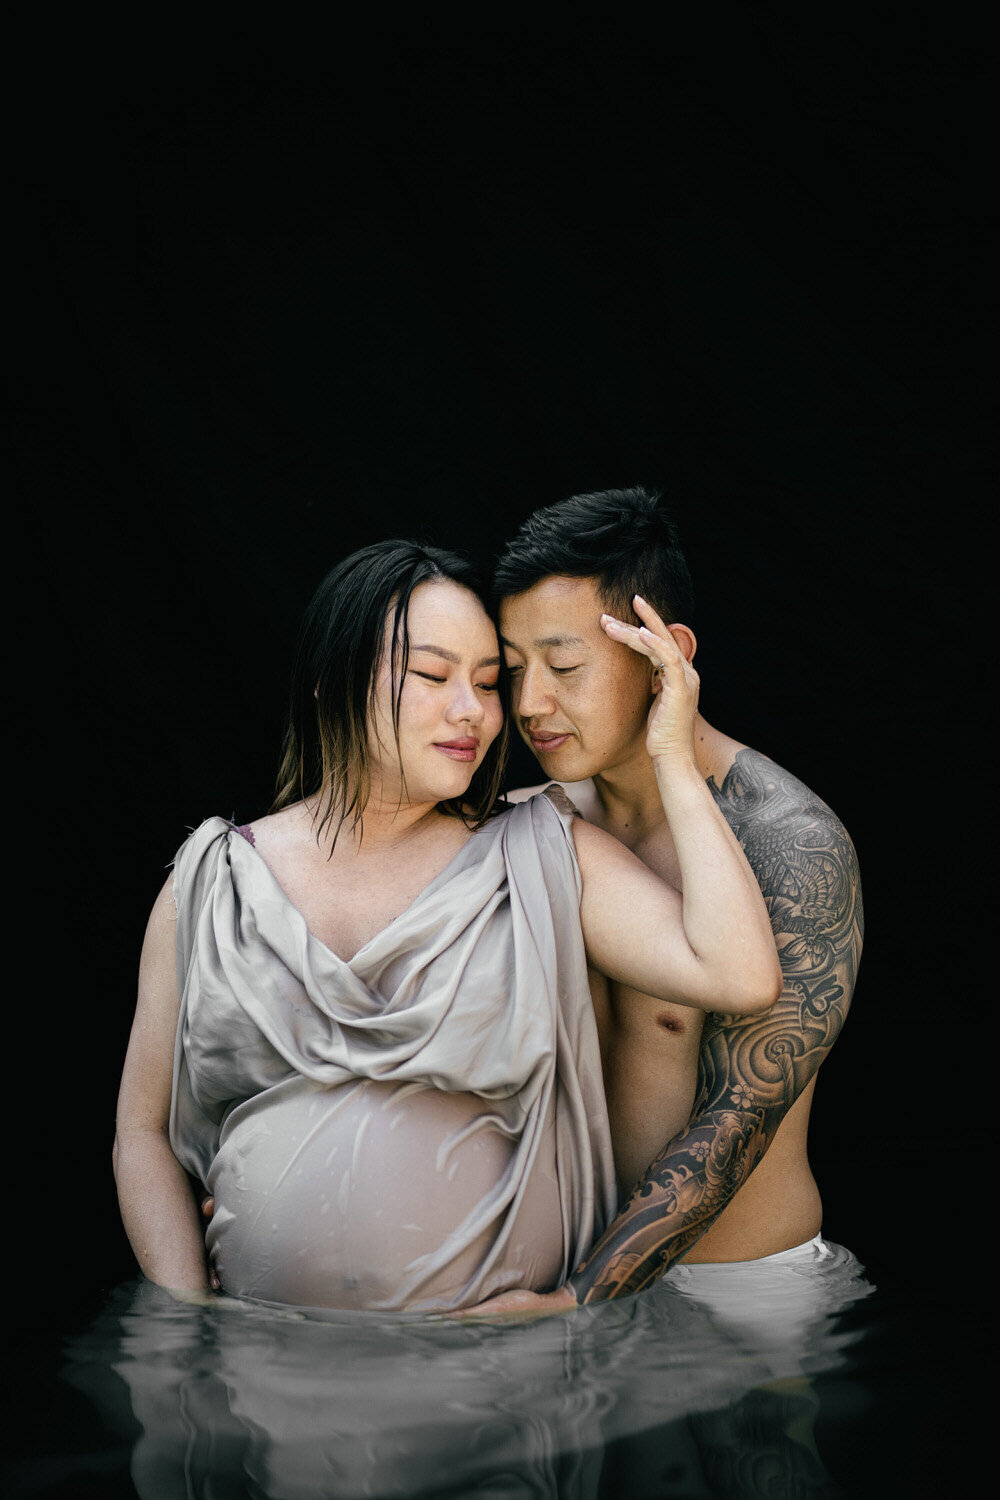 Pregnant woman stands in a pool with her partner and they both hold her bump